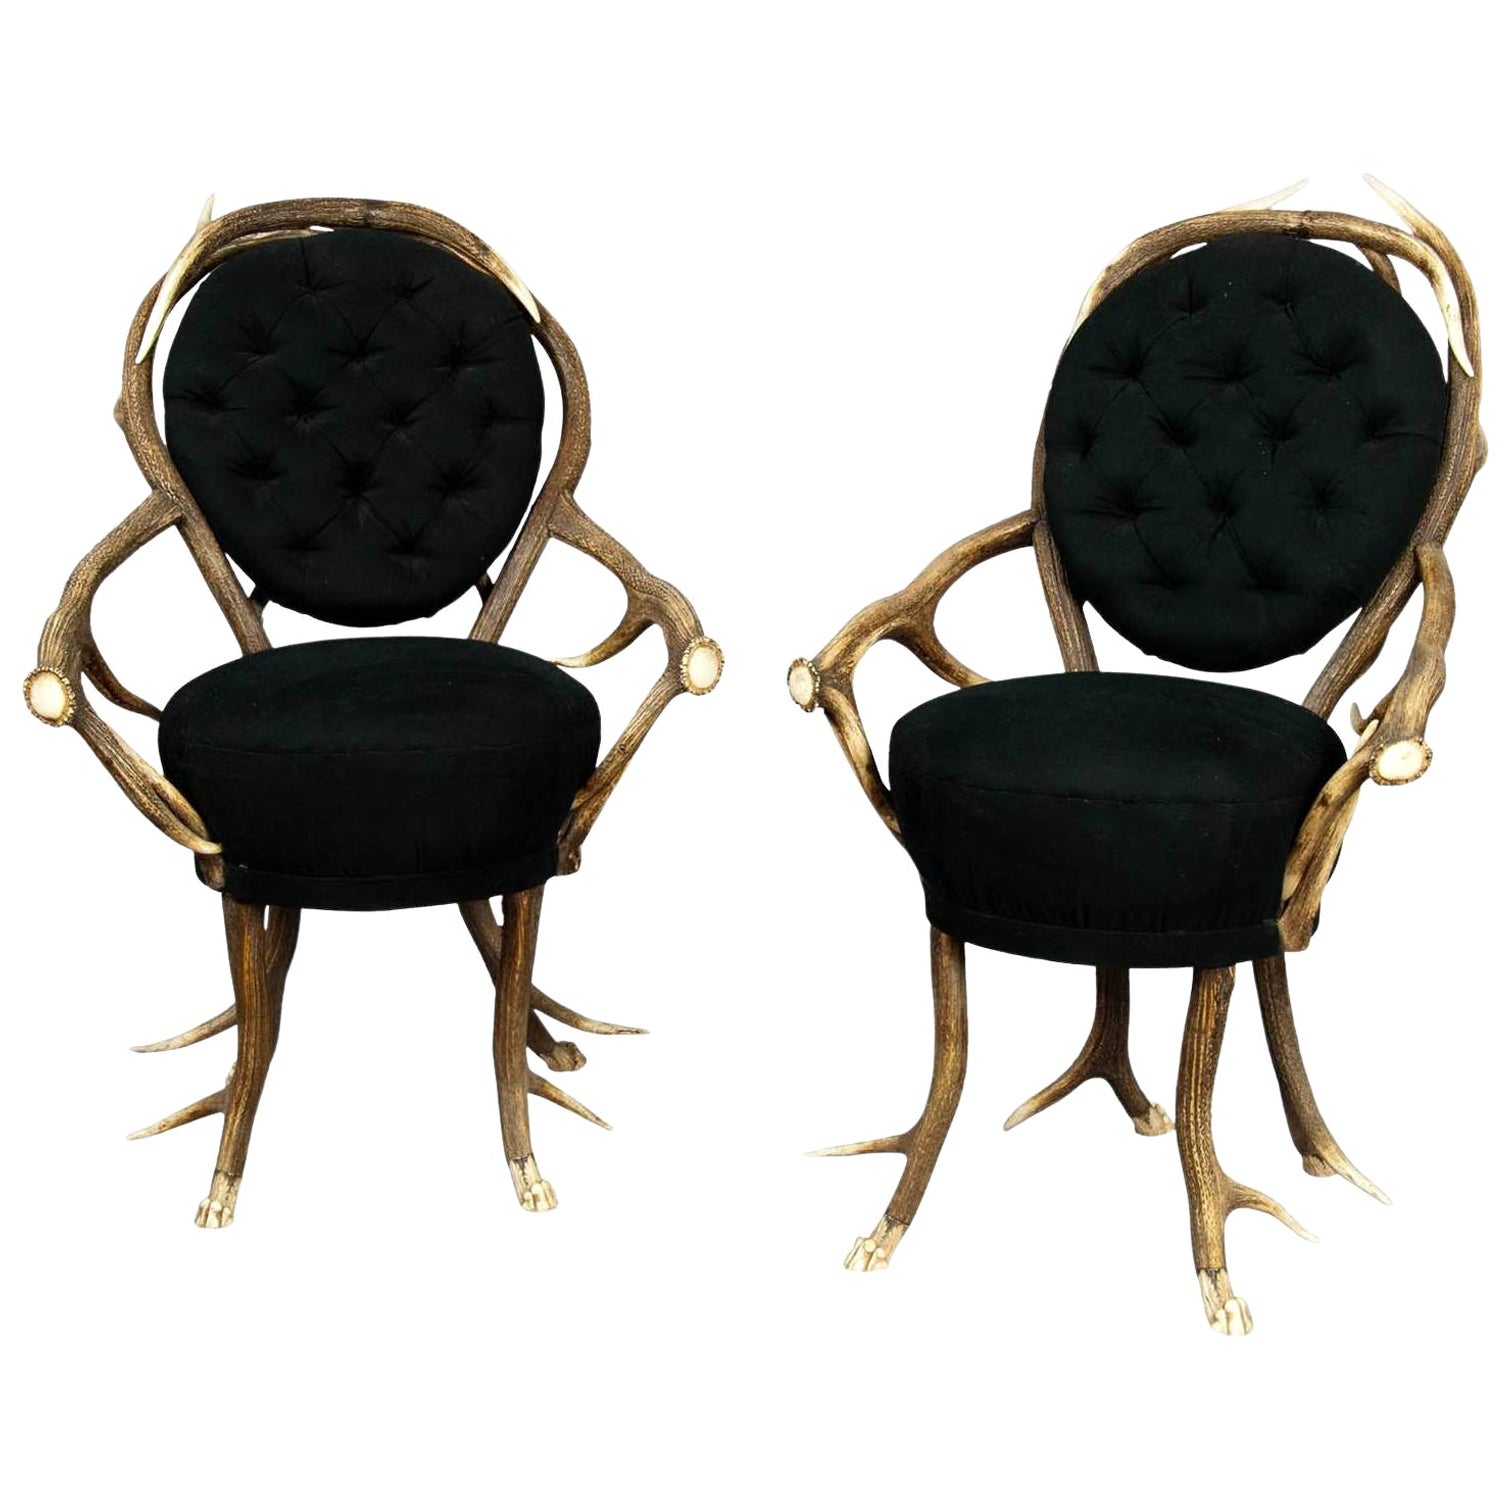 Pair of Rare Antler Parlor Chairs, French, ca. 1860 For Sale